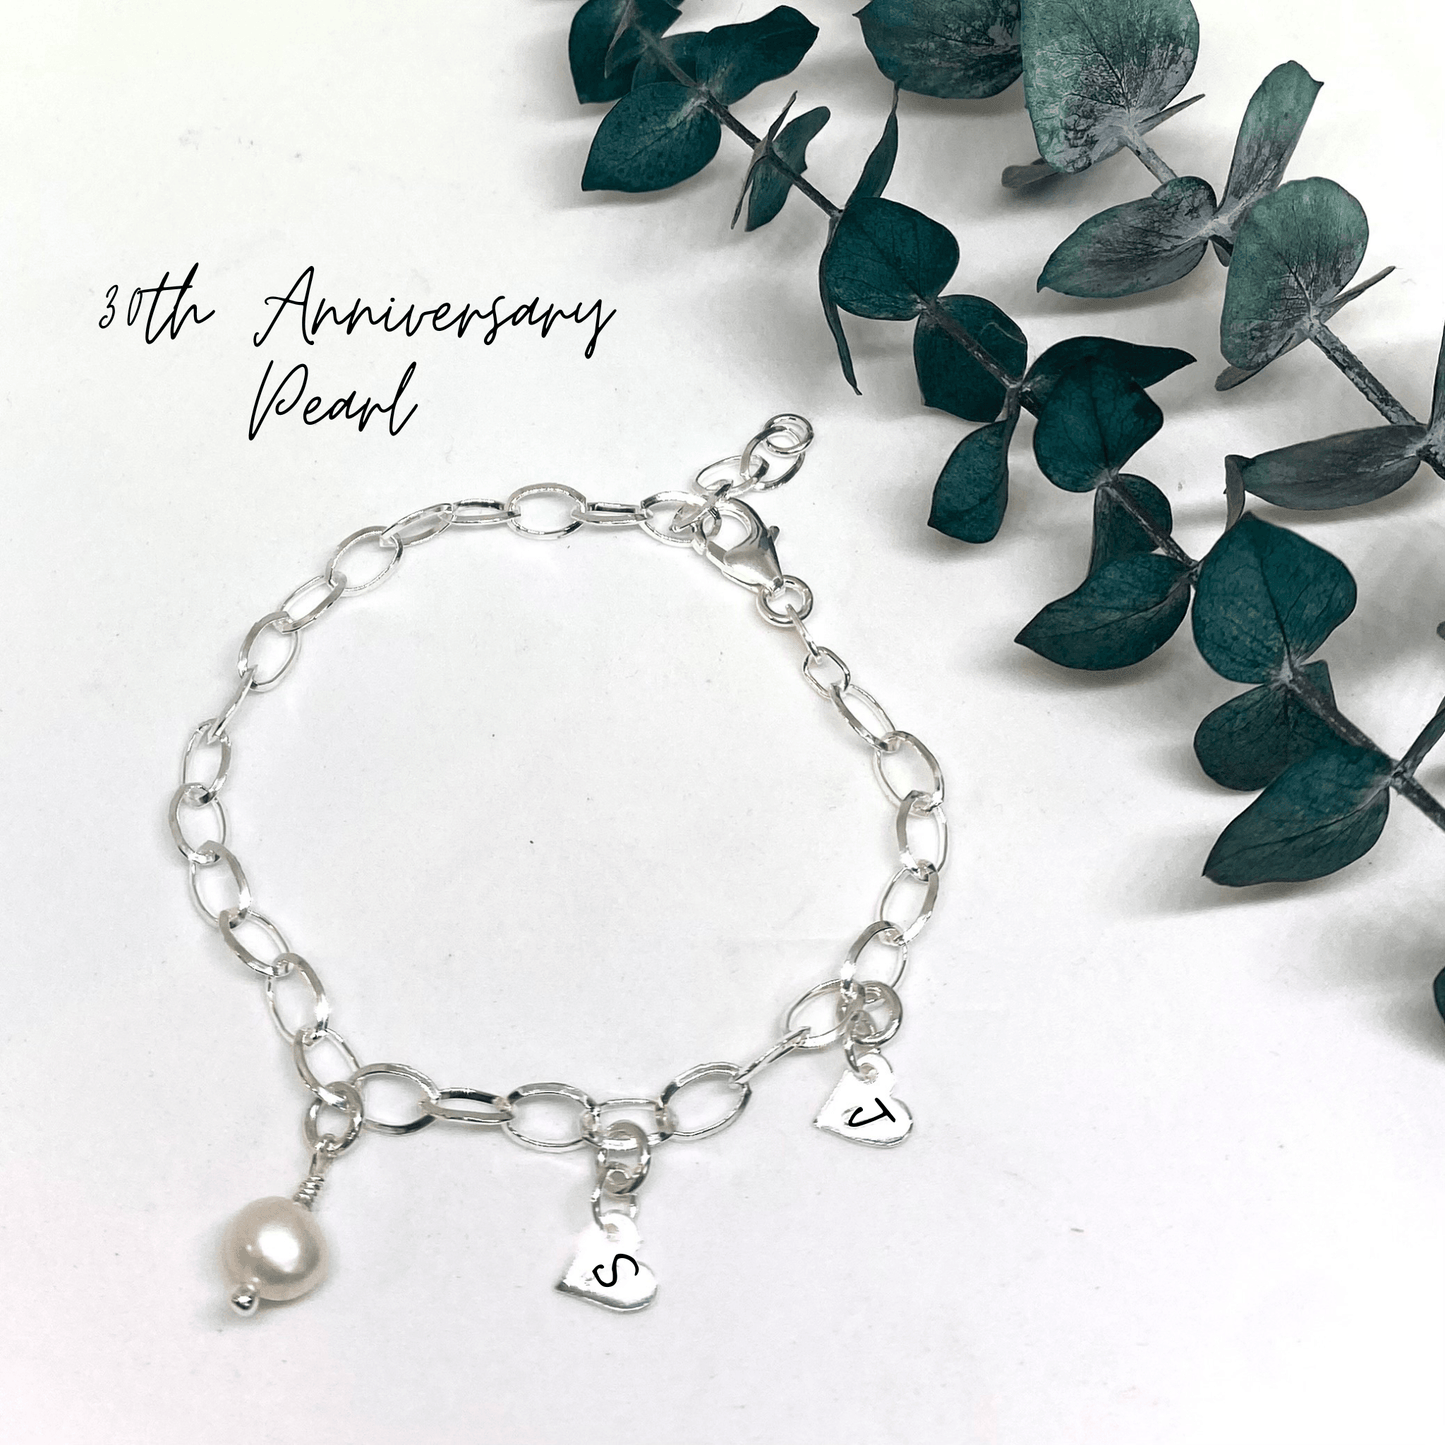 30th Anniversary Bracelet | Freshwater Pearl | Personalised heart charms | Sterling silver | 30th wedding anniversary gift - RACHEL SHRIEVES DESIGN